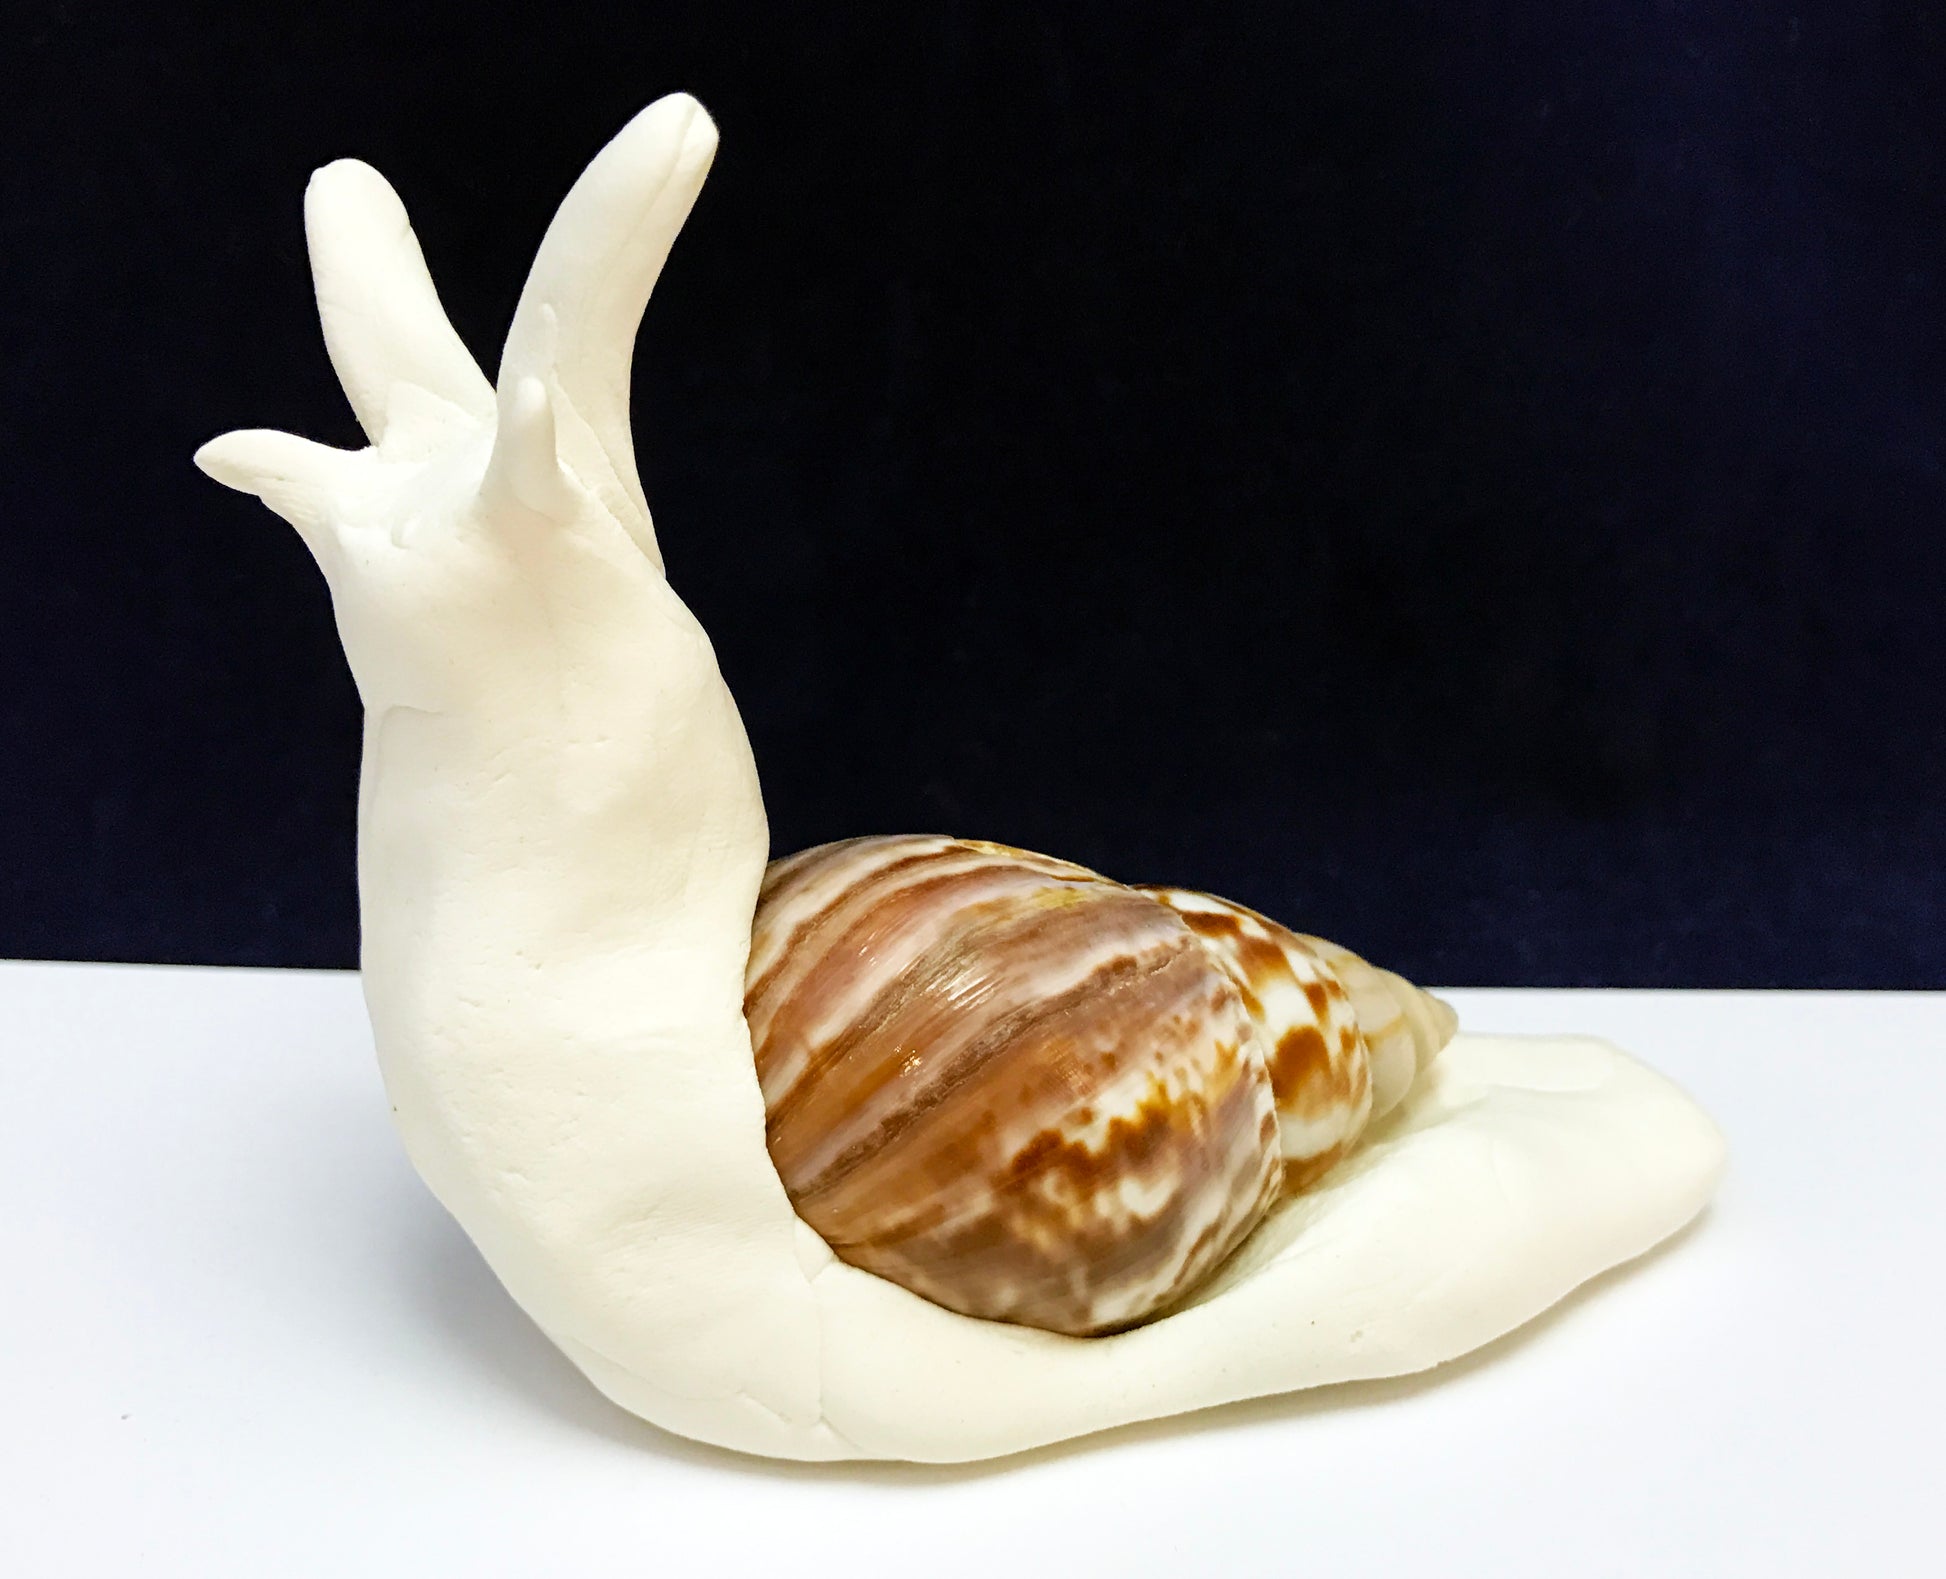 Kids science snail art activity. Use clay and a shell to make a snail.